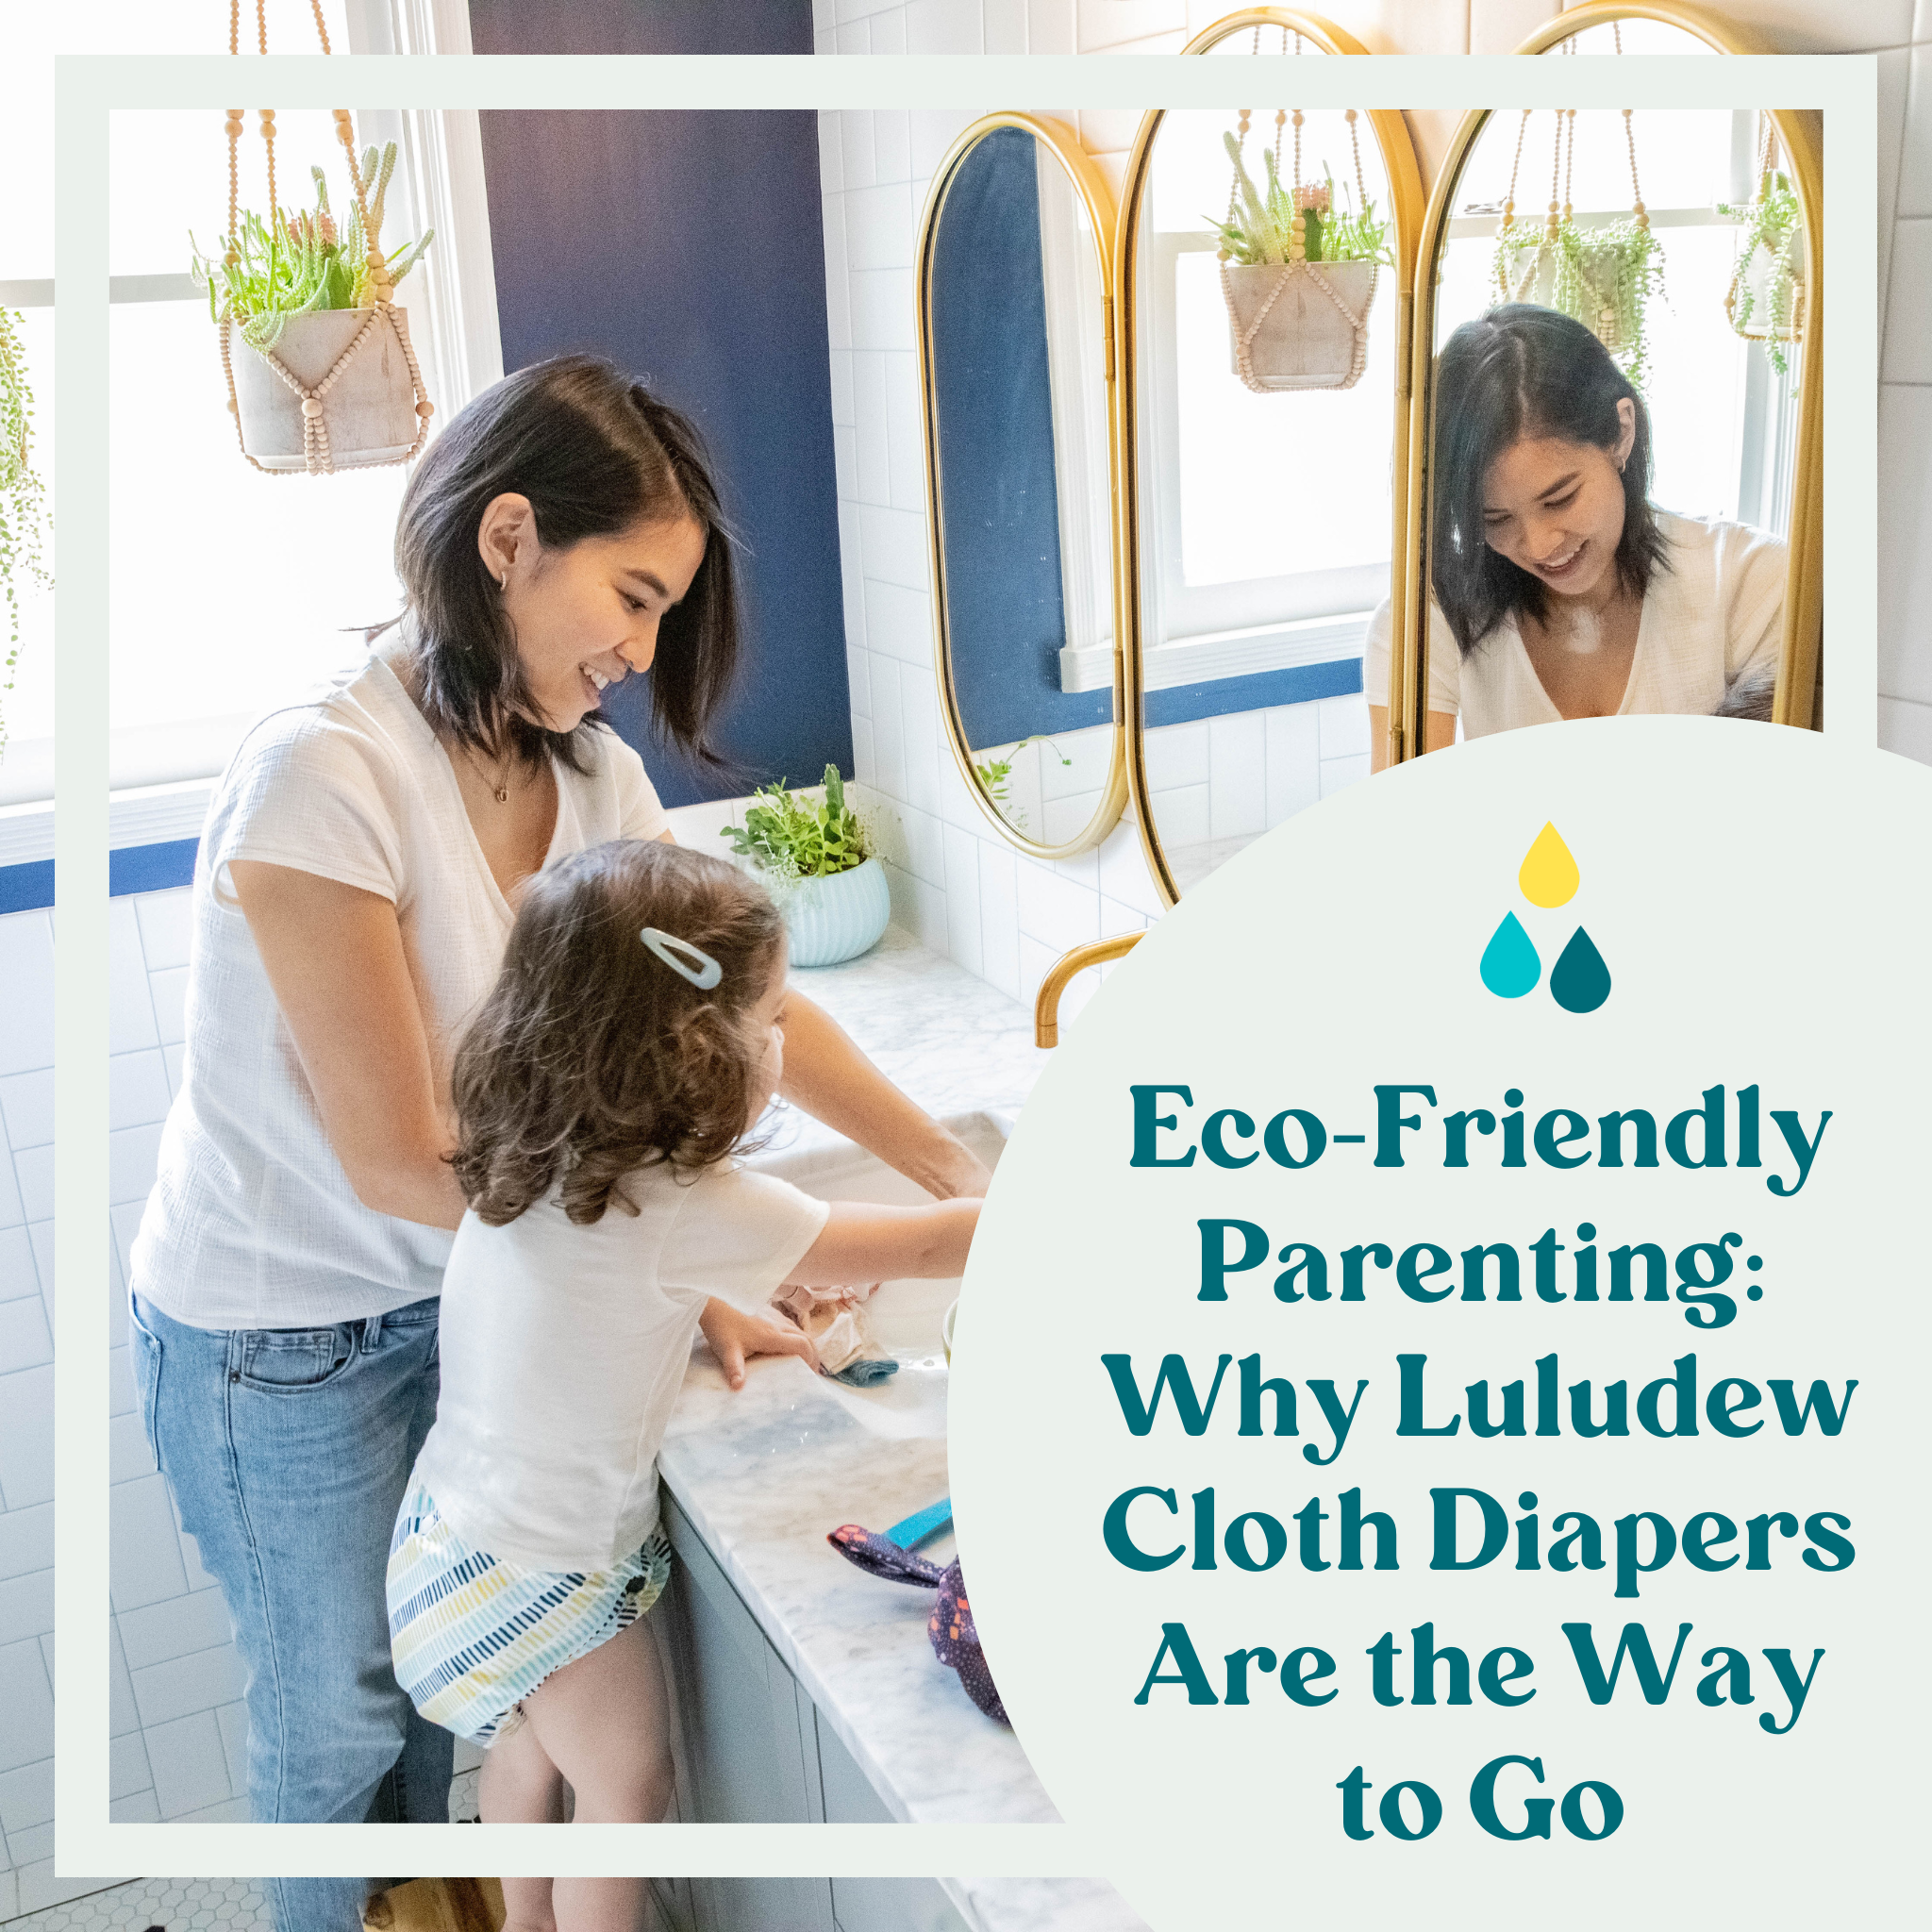 Eco-Friendly Parenting: Why Luludew Cloth Diapers Are the Way to Go